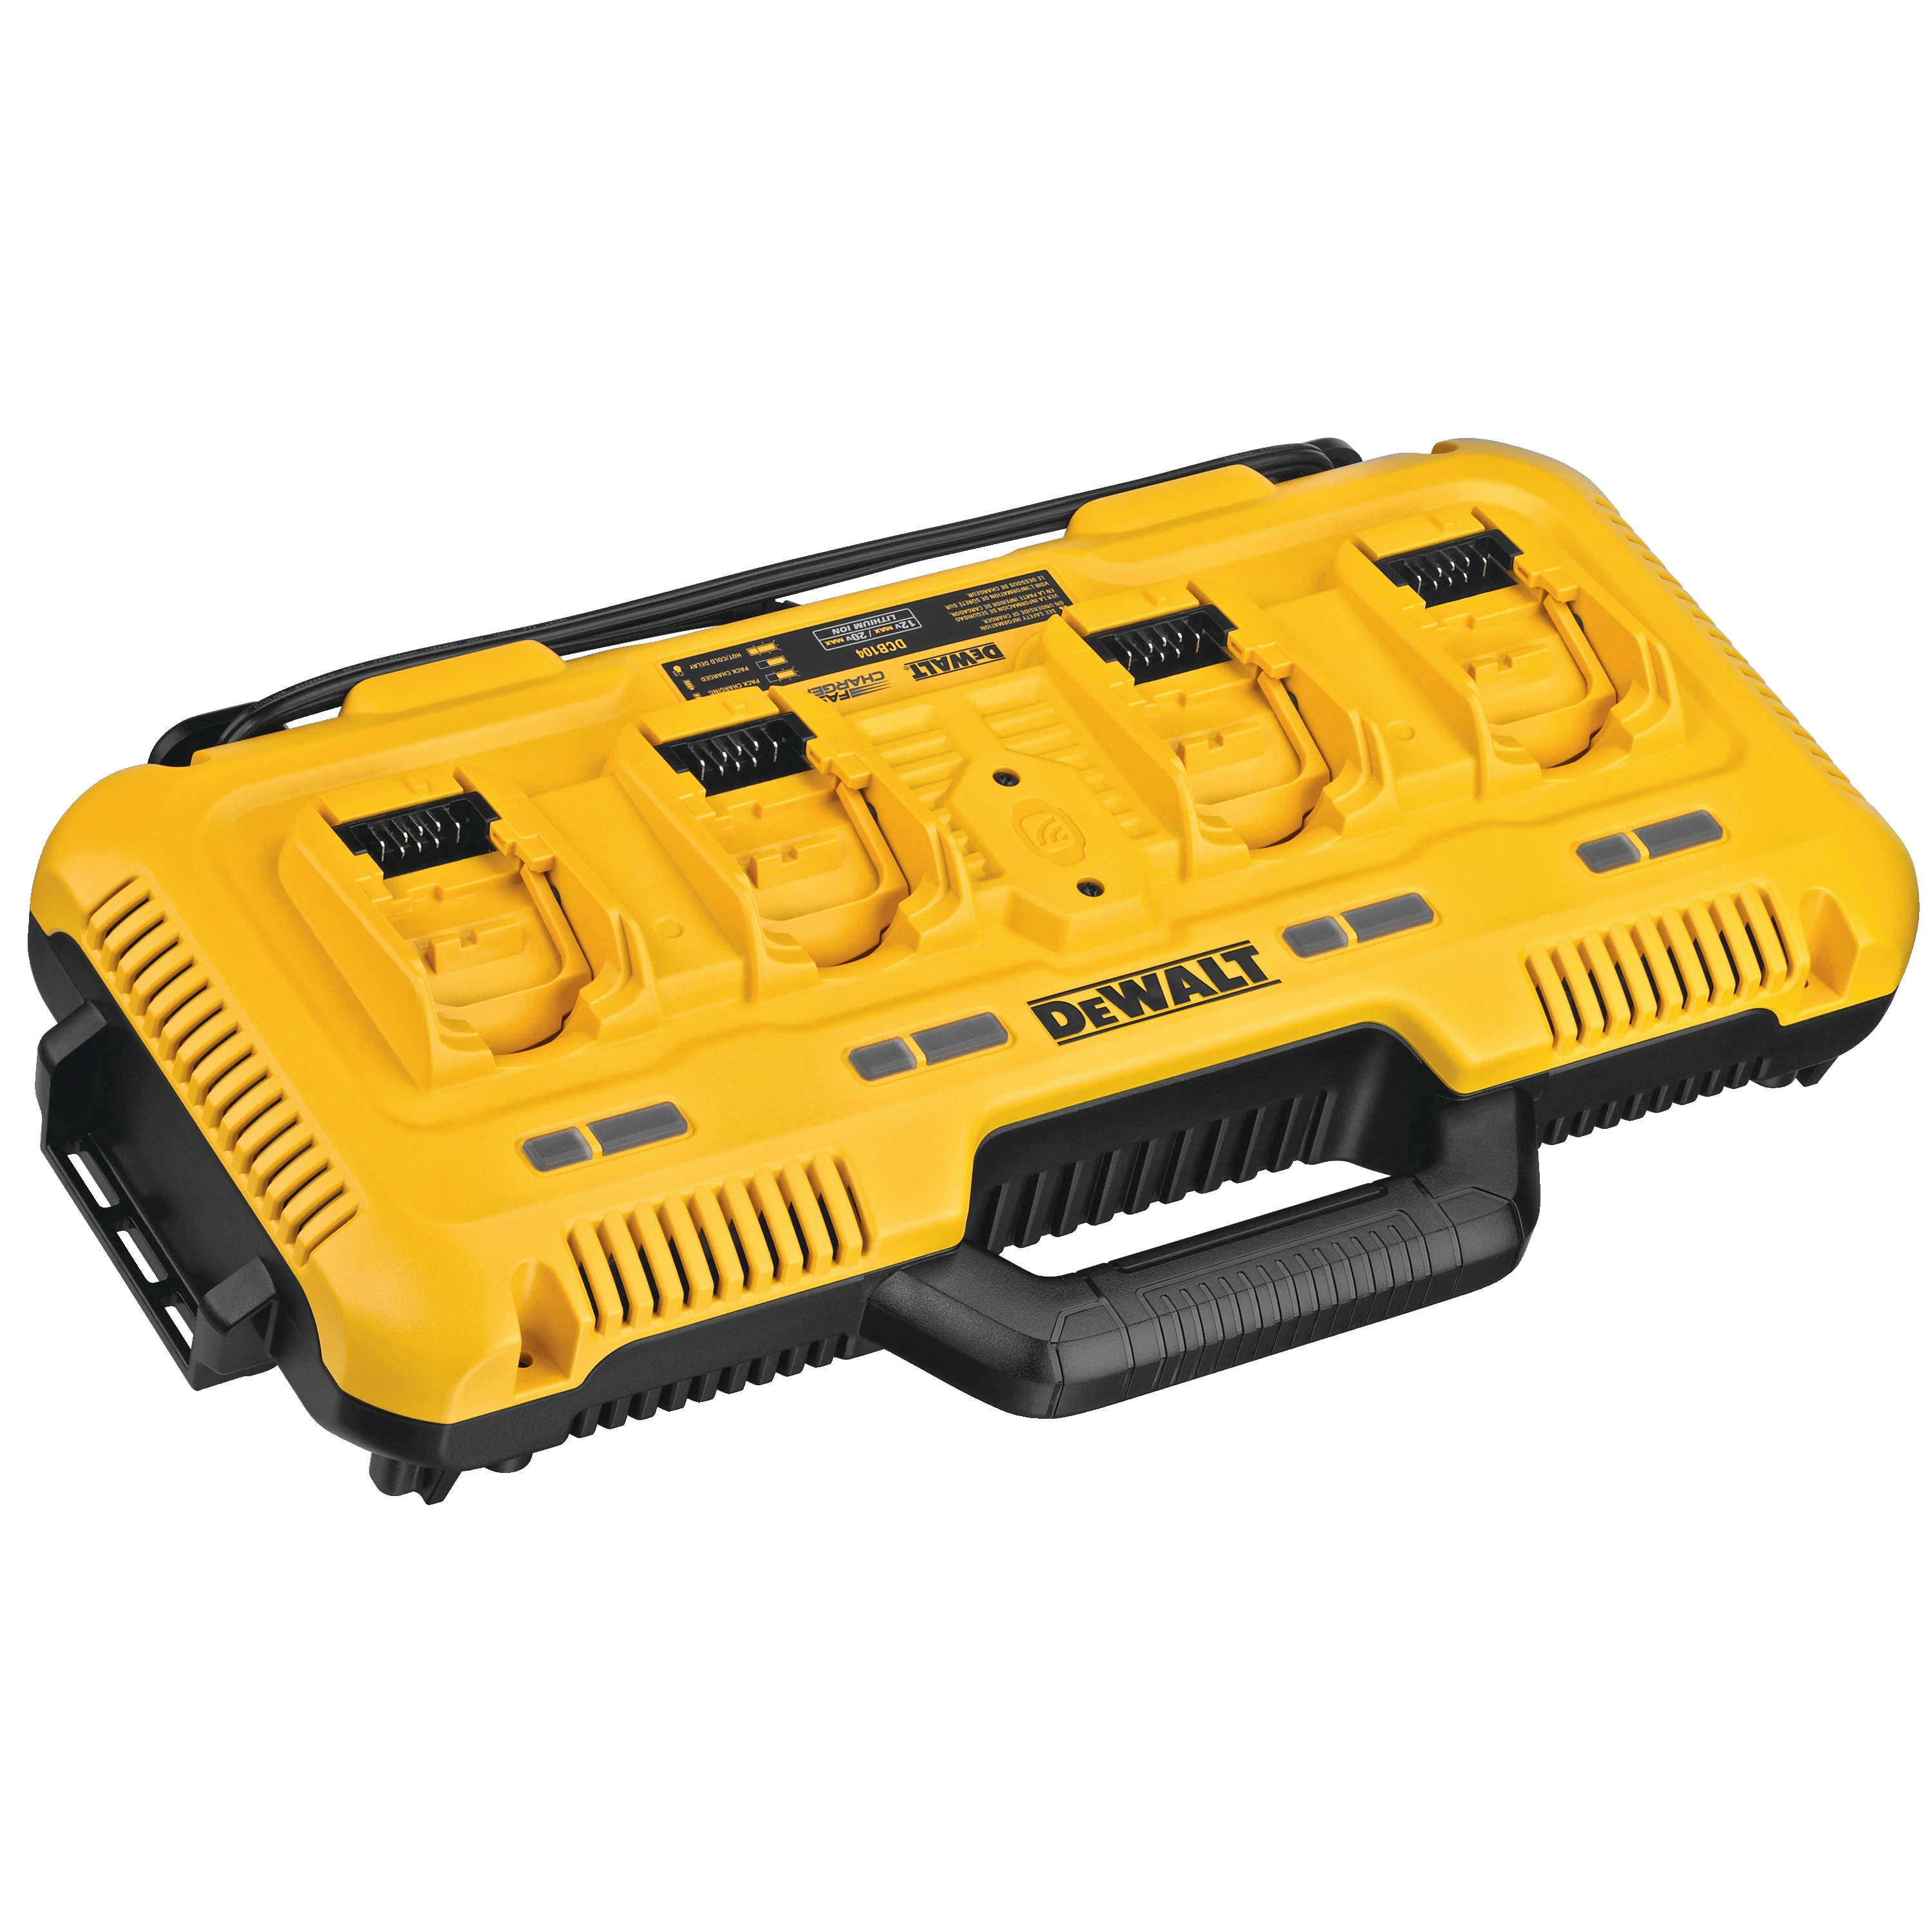 Multiport Simultaneous Fast Charger - Power Tool Accessories